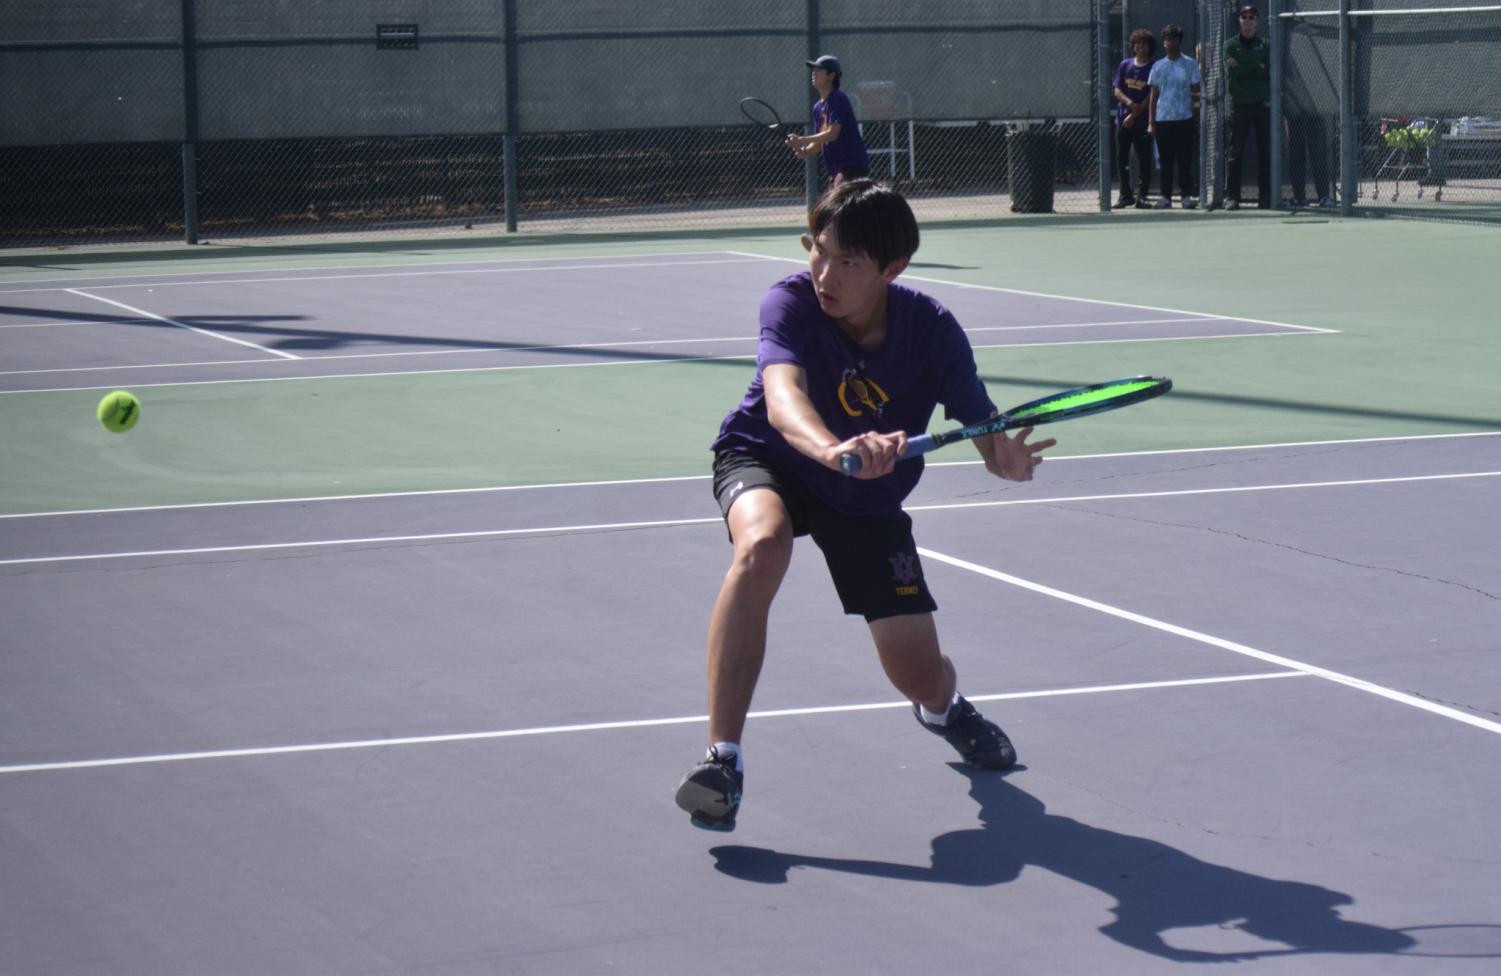 Boys+Varsity+Tennis+Takes+Down+El+Cerrito+High+in+a+Clean+7-0+Sweep+to+Advance+to+NCS+Quarterfinals